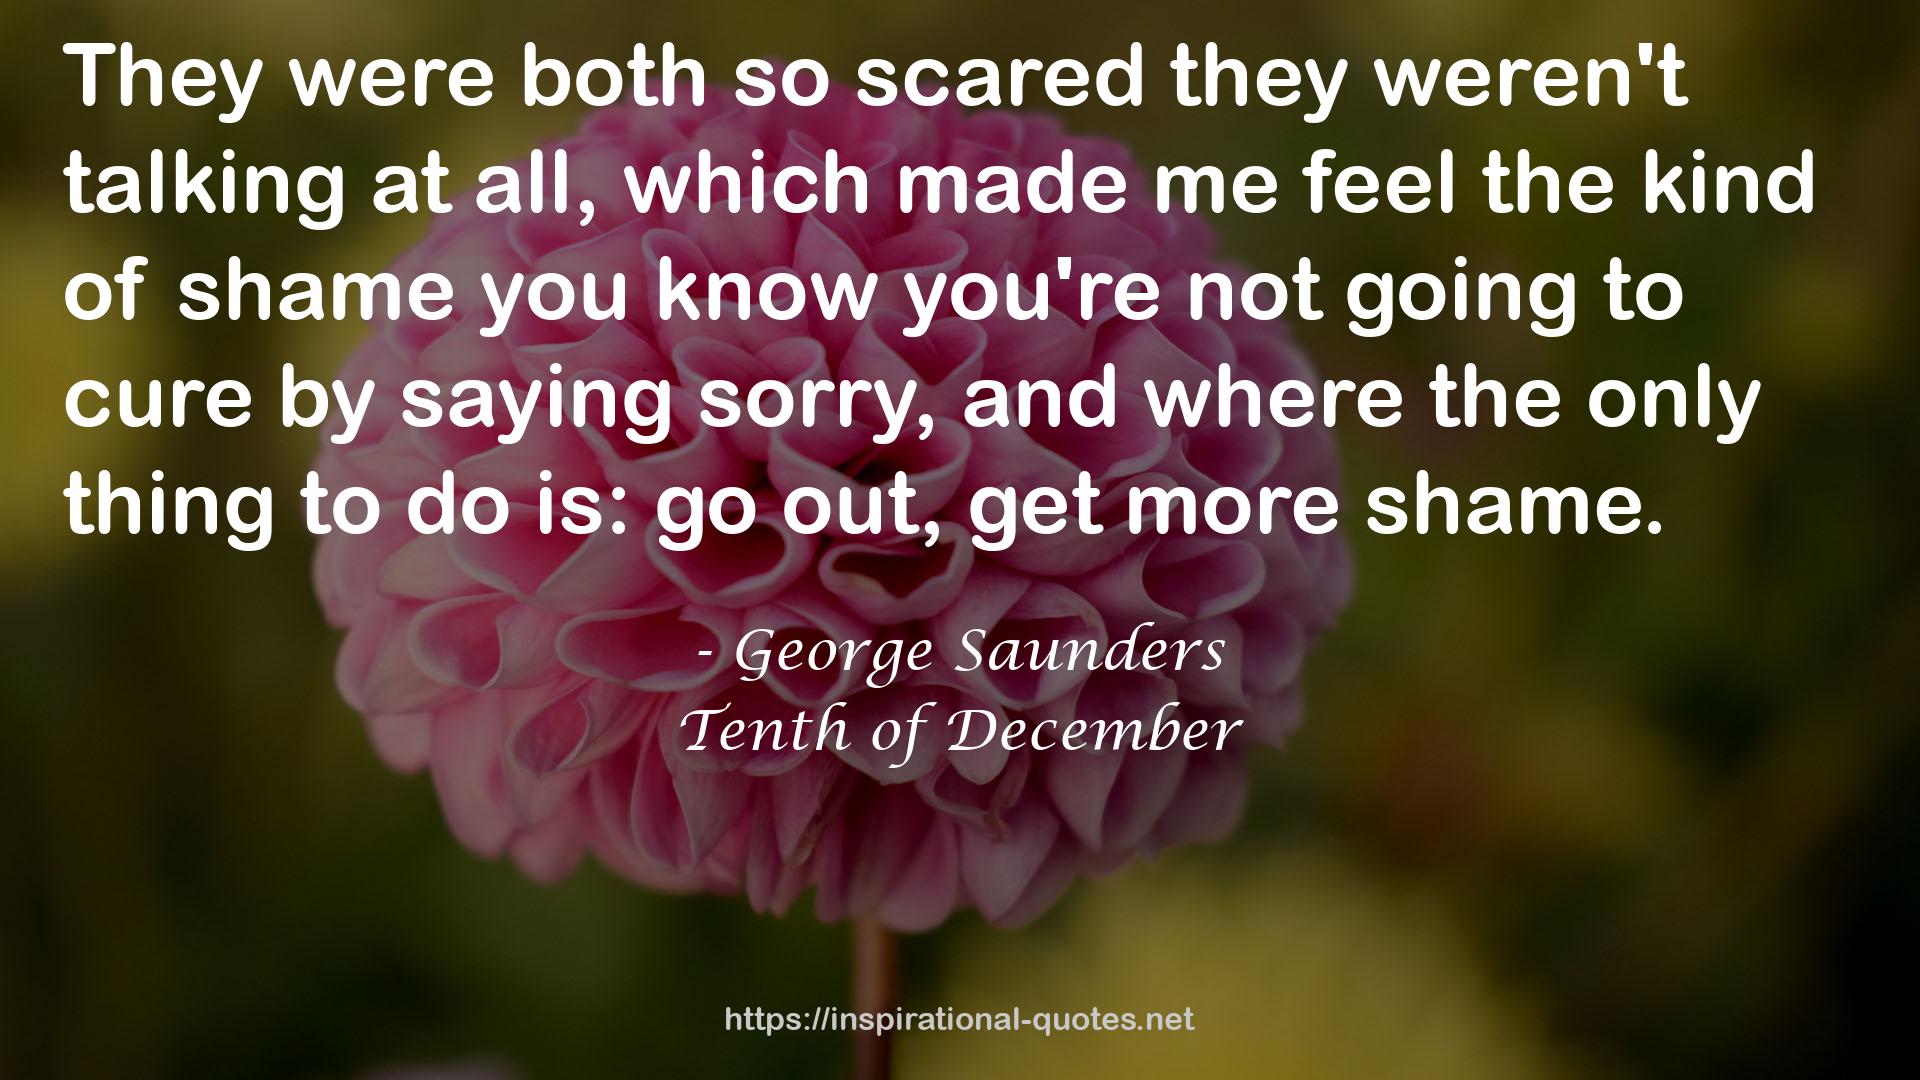 George Saunders QUOTES